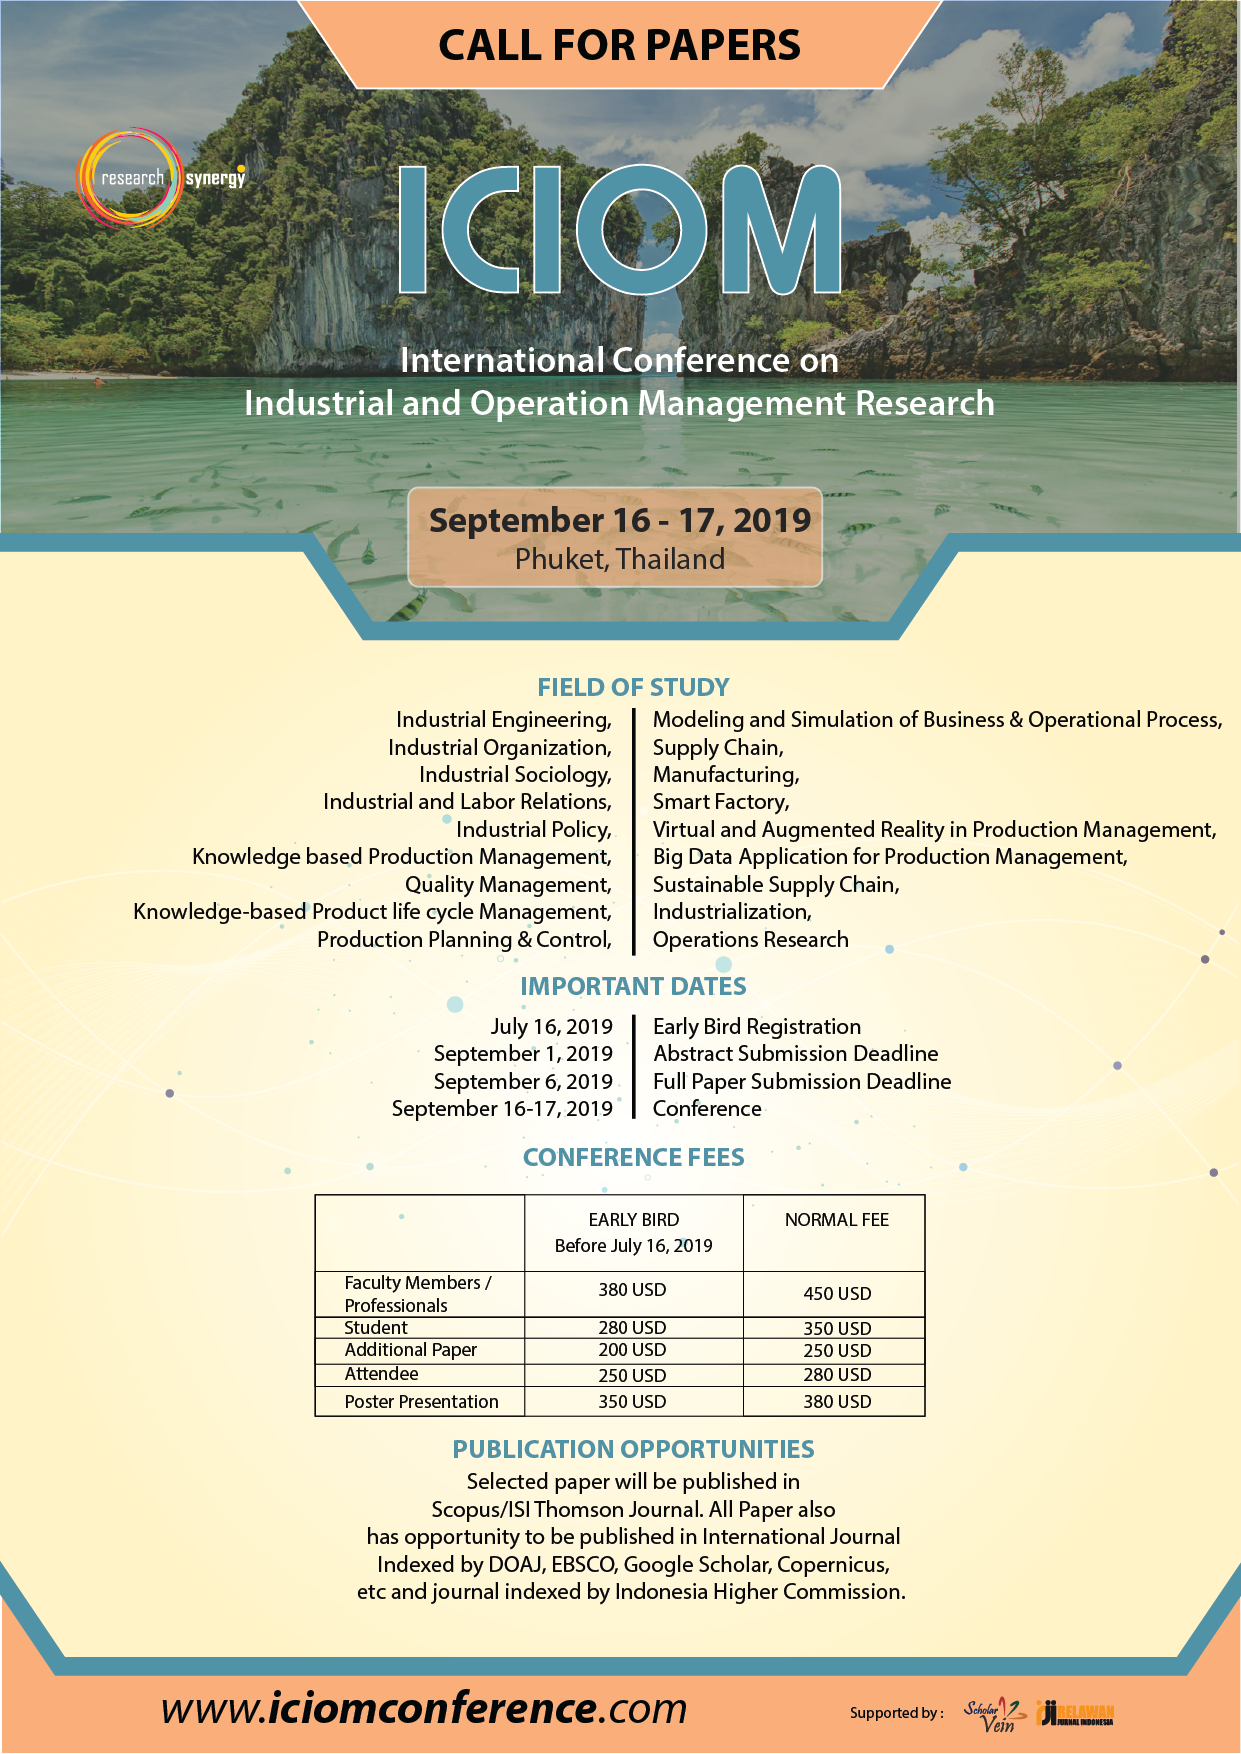 International Conference on Industrial and Operation Management Research (ICIOM)